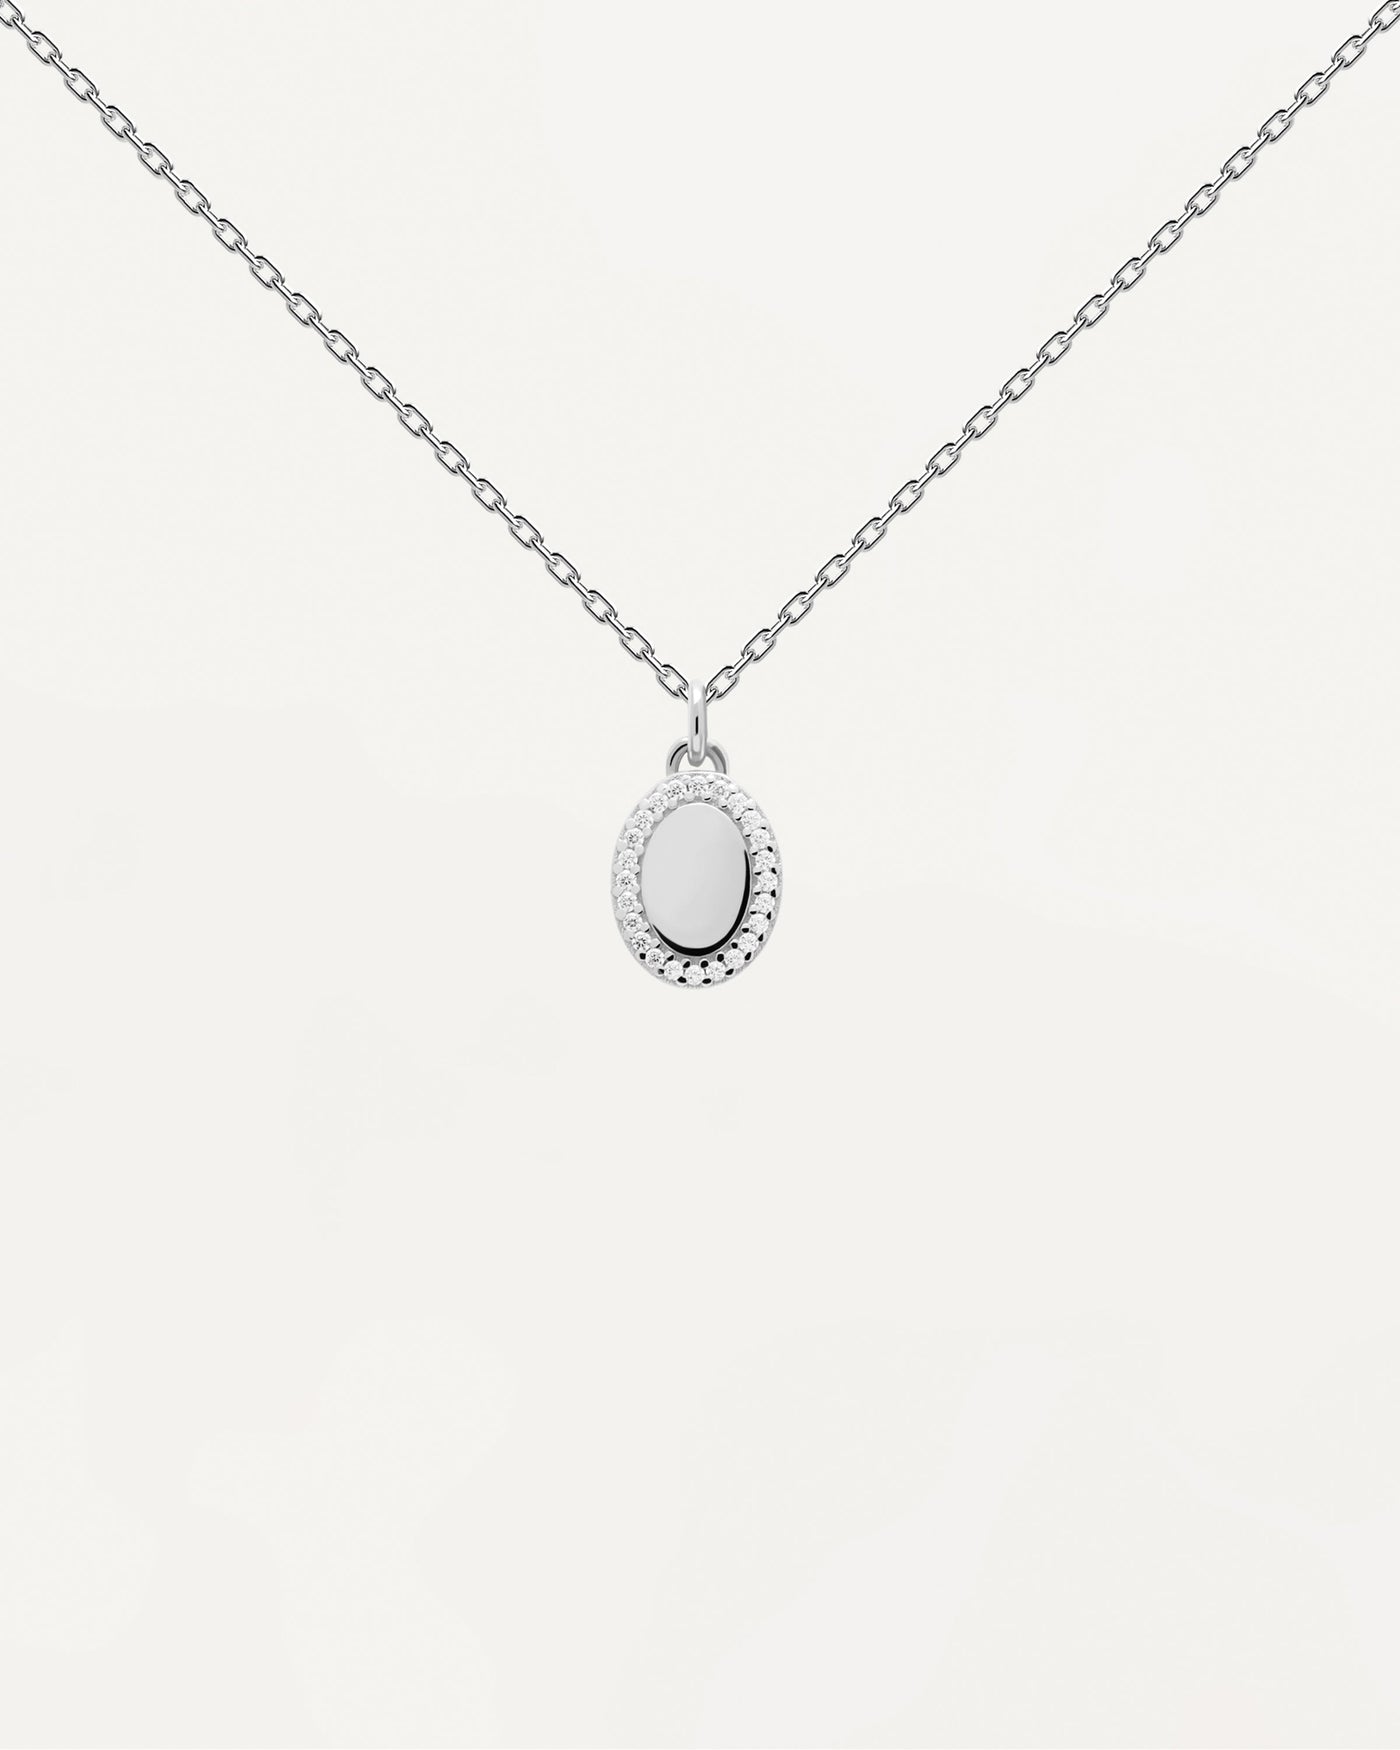 2023 Selection | Mademoiselle Silver Necklace. Sterling silver necklace with pendant circled by white zirconia to personalize. Get the latest arrival from PDPAOLA. Place your order safely and get this Best Seller. Free Shipping.